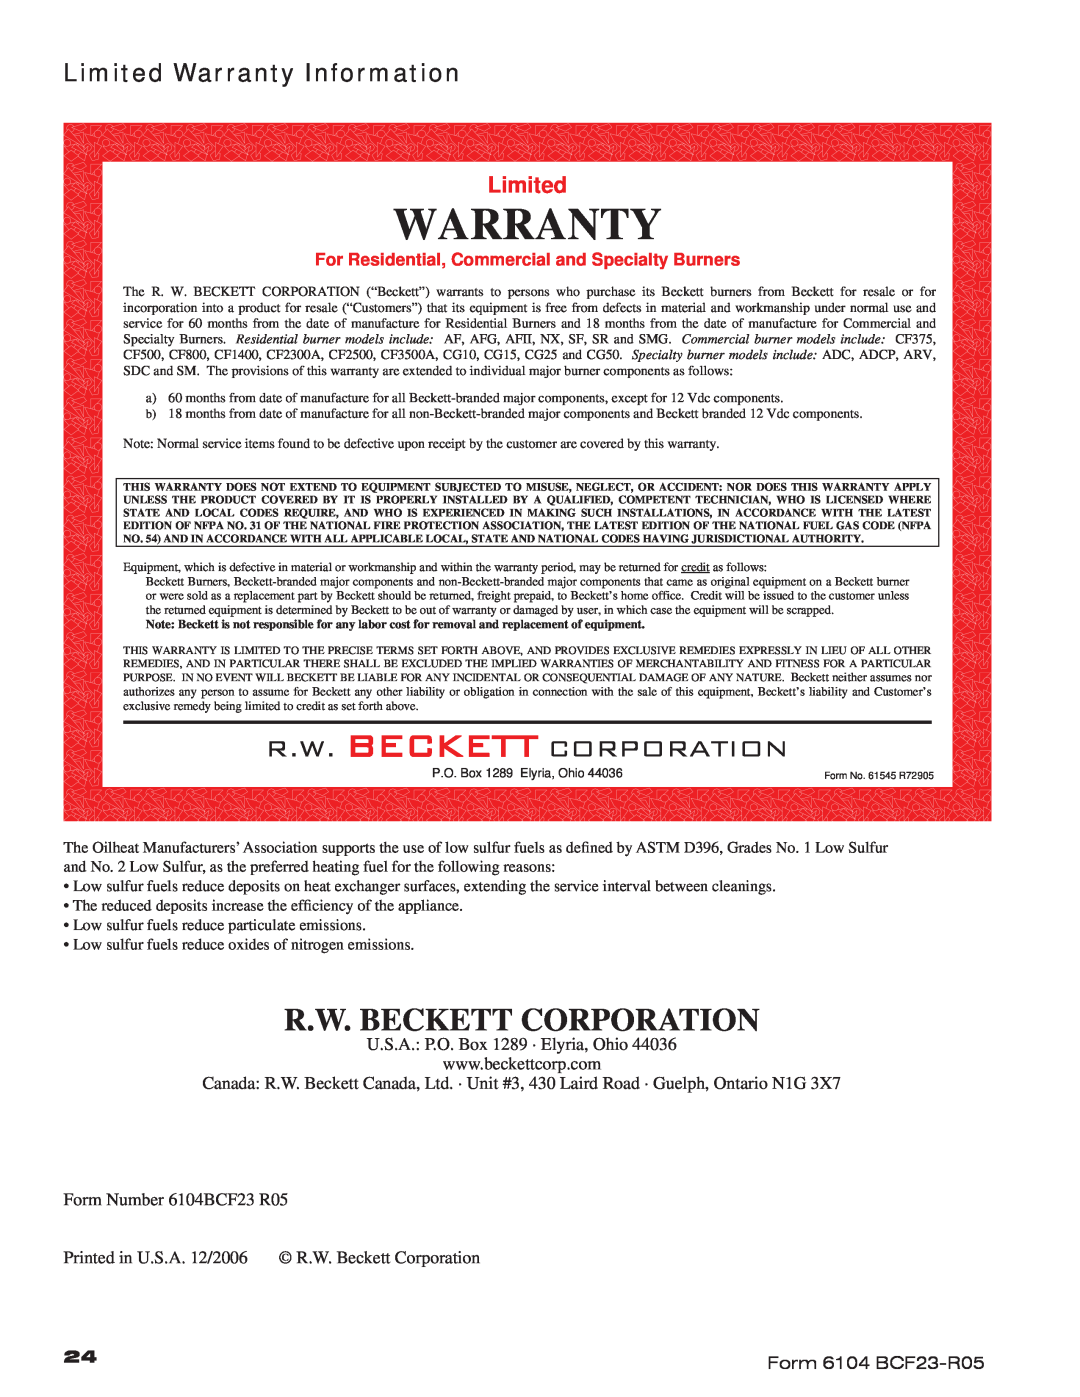 Beckett CF2300 Limited Warranty Information, R.W. Beckett Corporation, For Residential, Commercial and Specialty Burners 